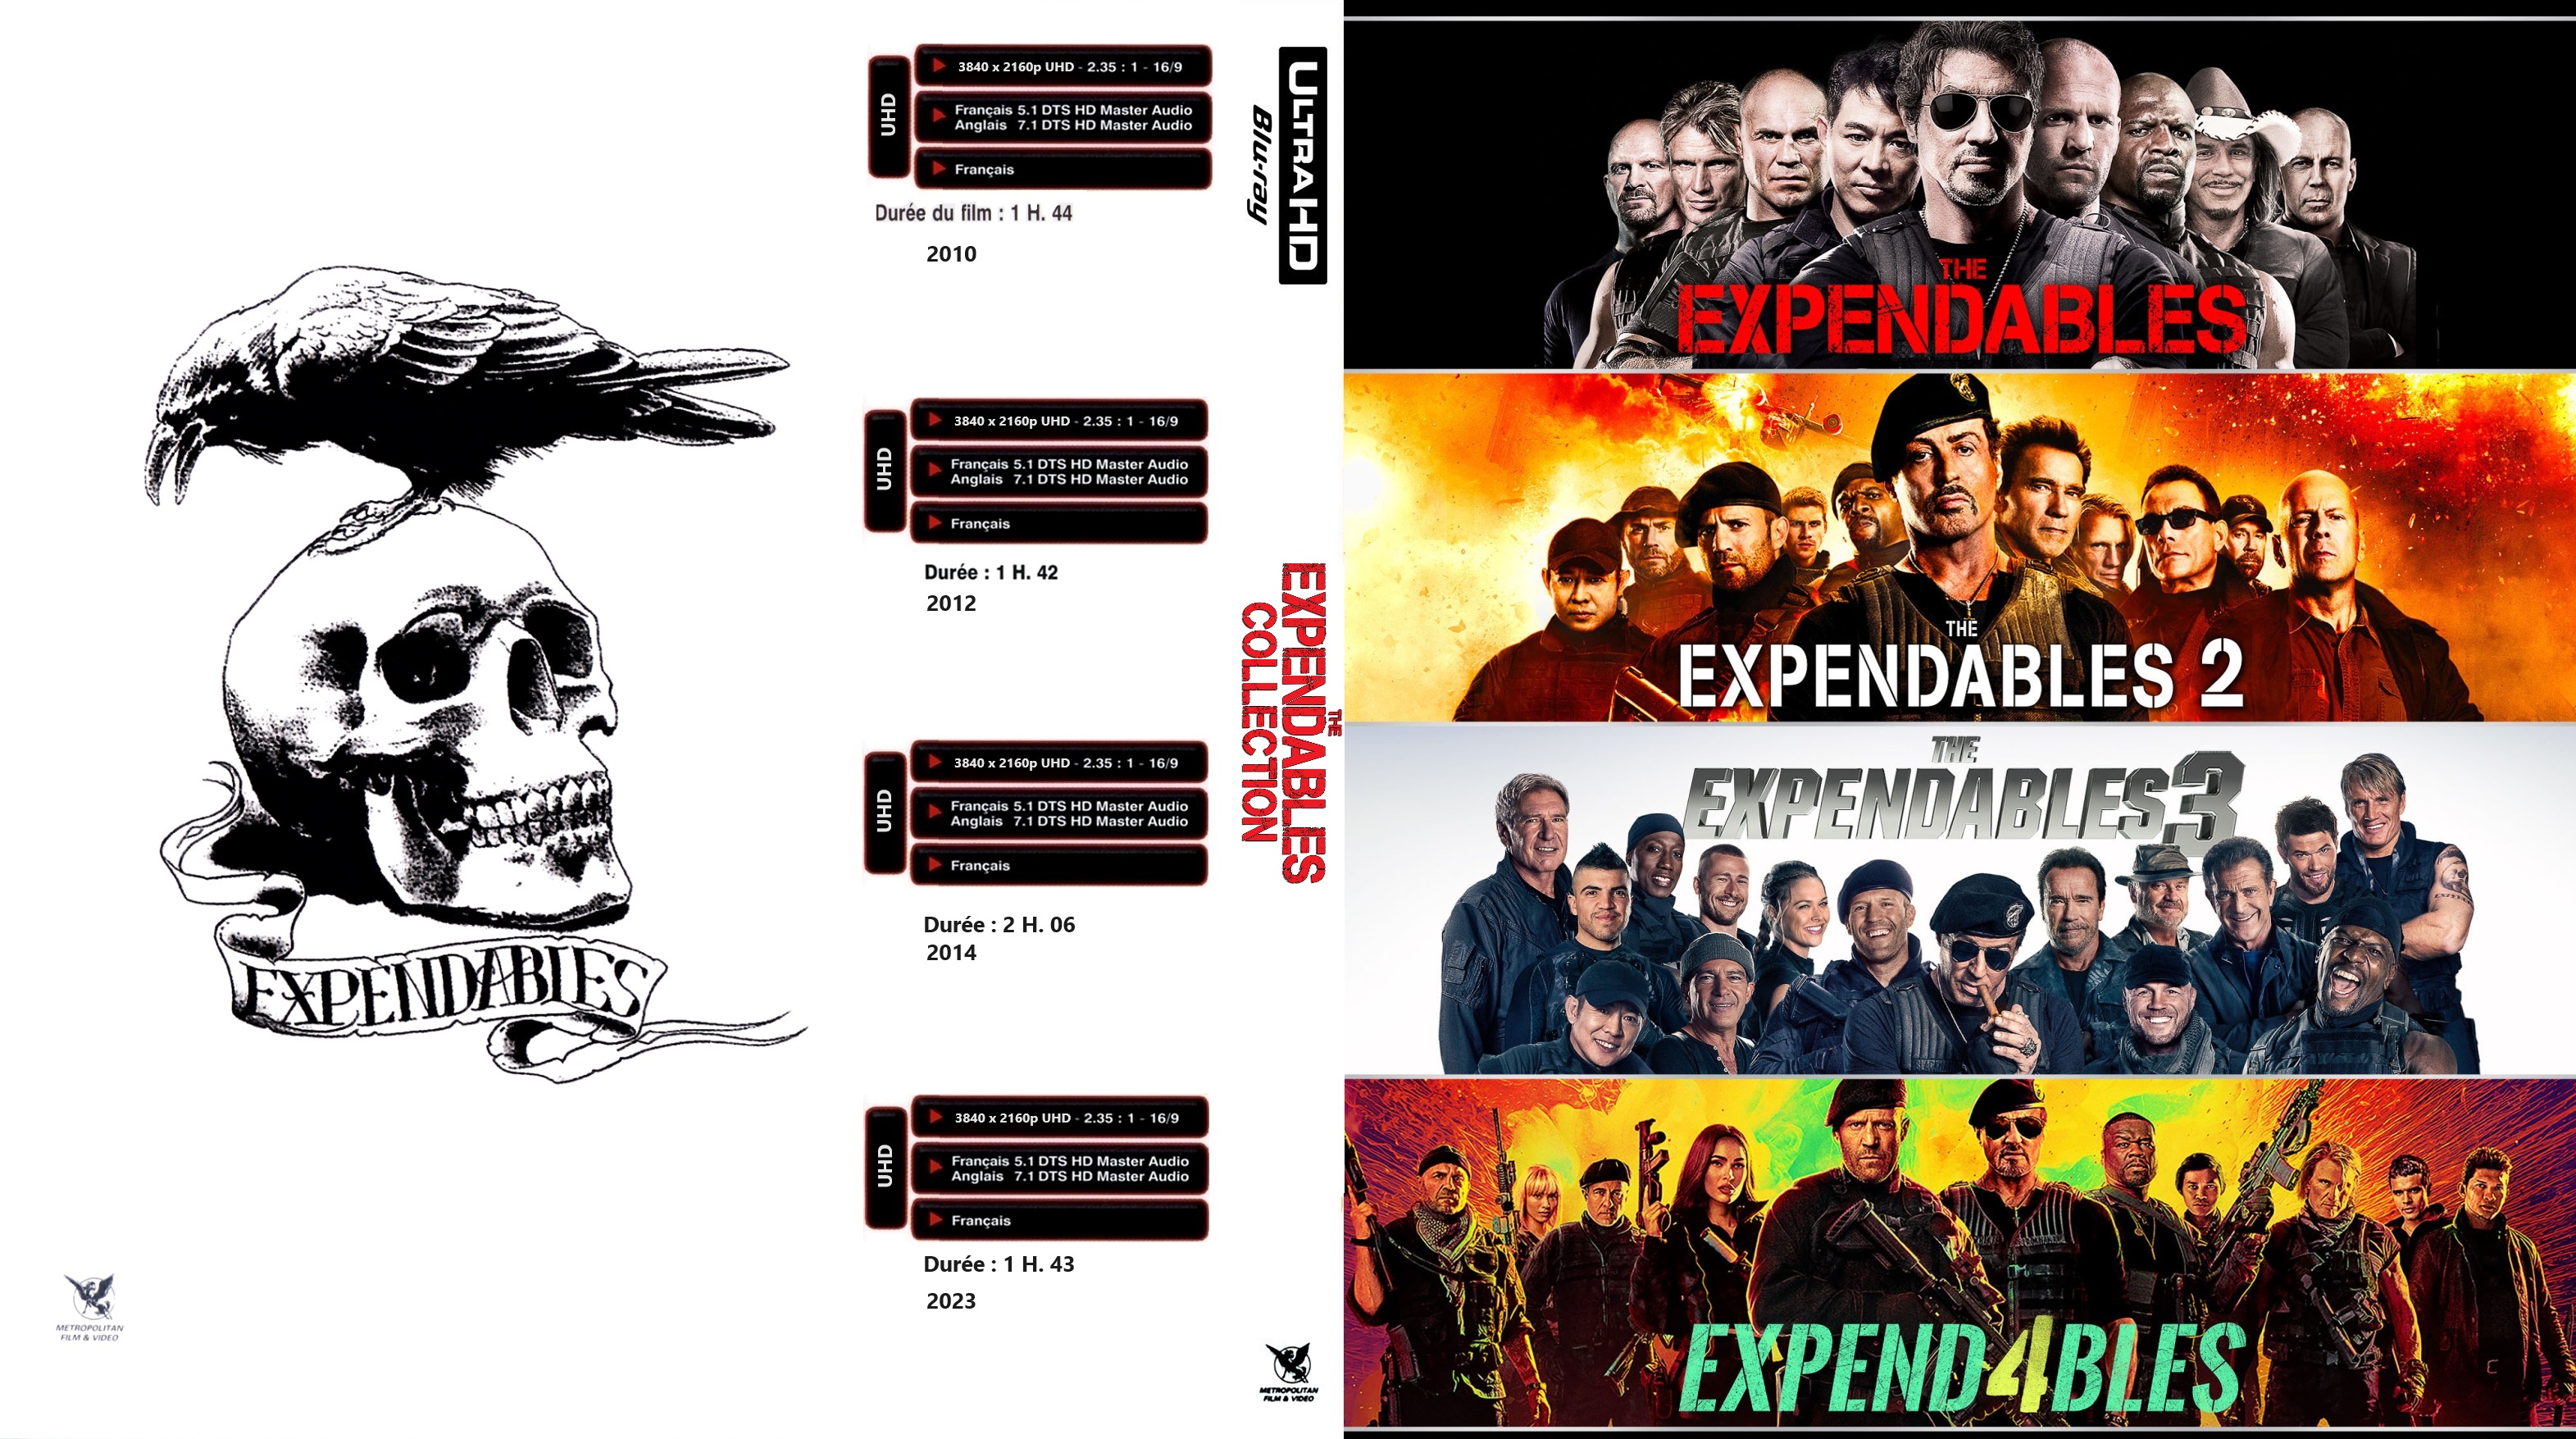 Jaquette DVD Expendables Collection custom 4K (BLU-RAY)